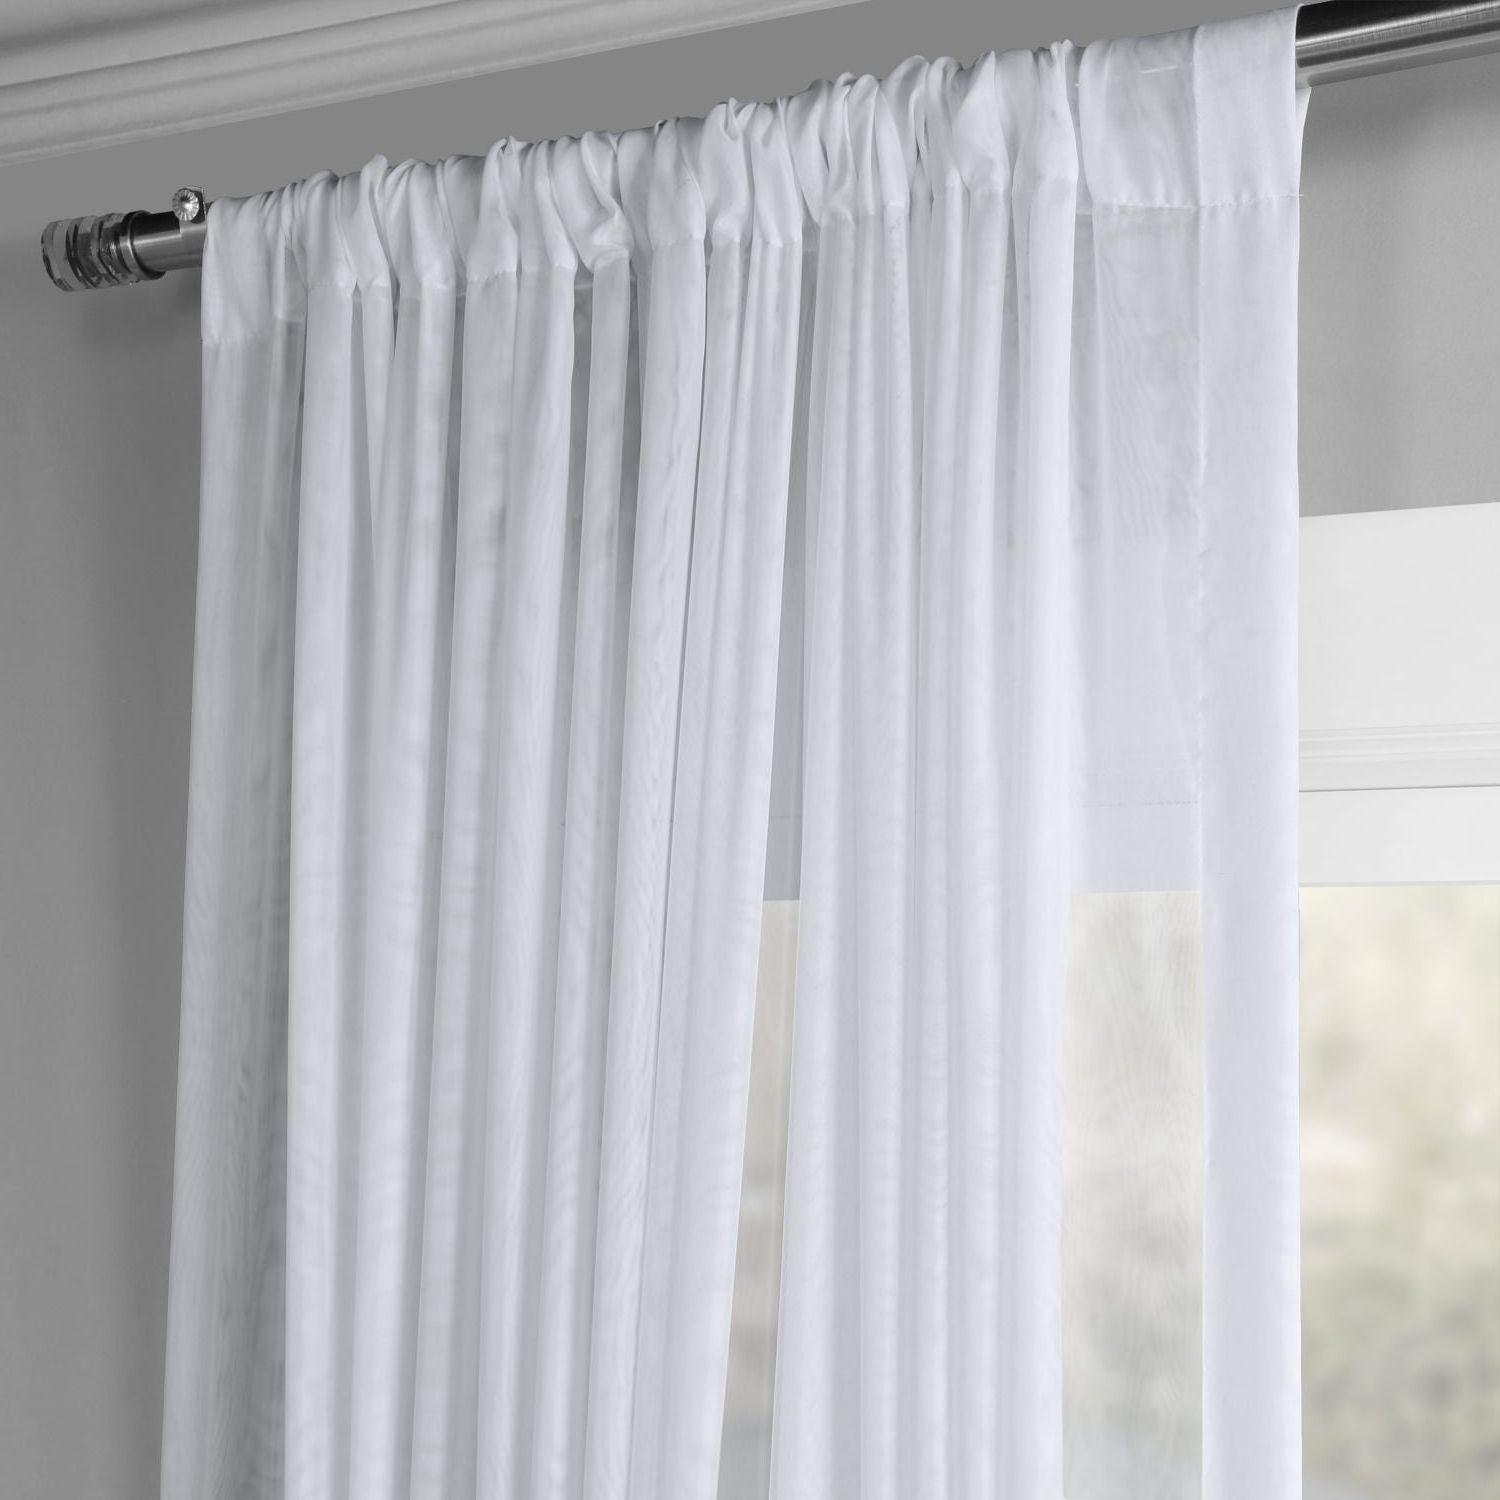 Double Layer Sheer White Single Curtain Panels Regarding Famous Exclusive Fabrics Double Layer Sheer White Single Curtain Panel (View 2 of 20)